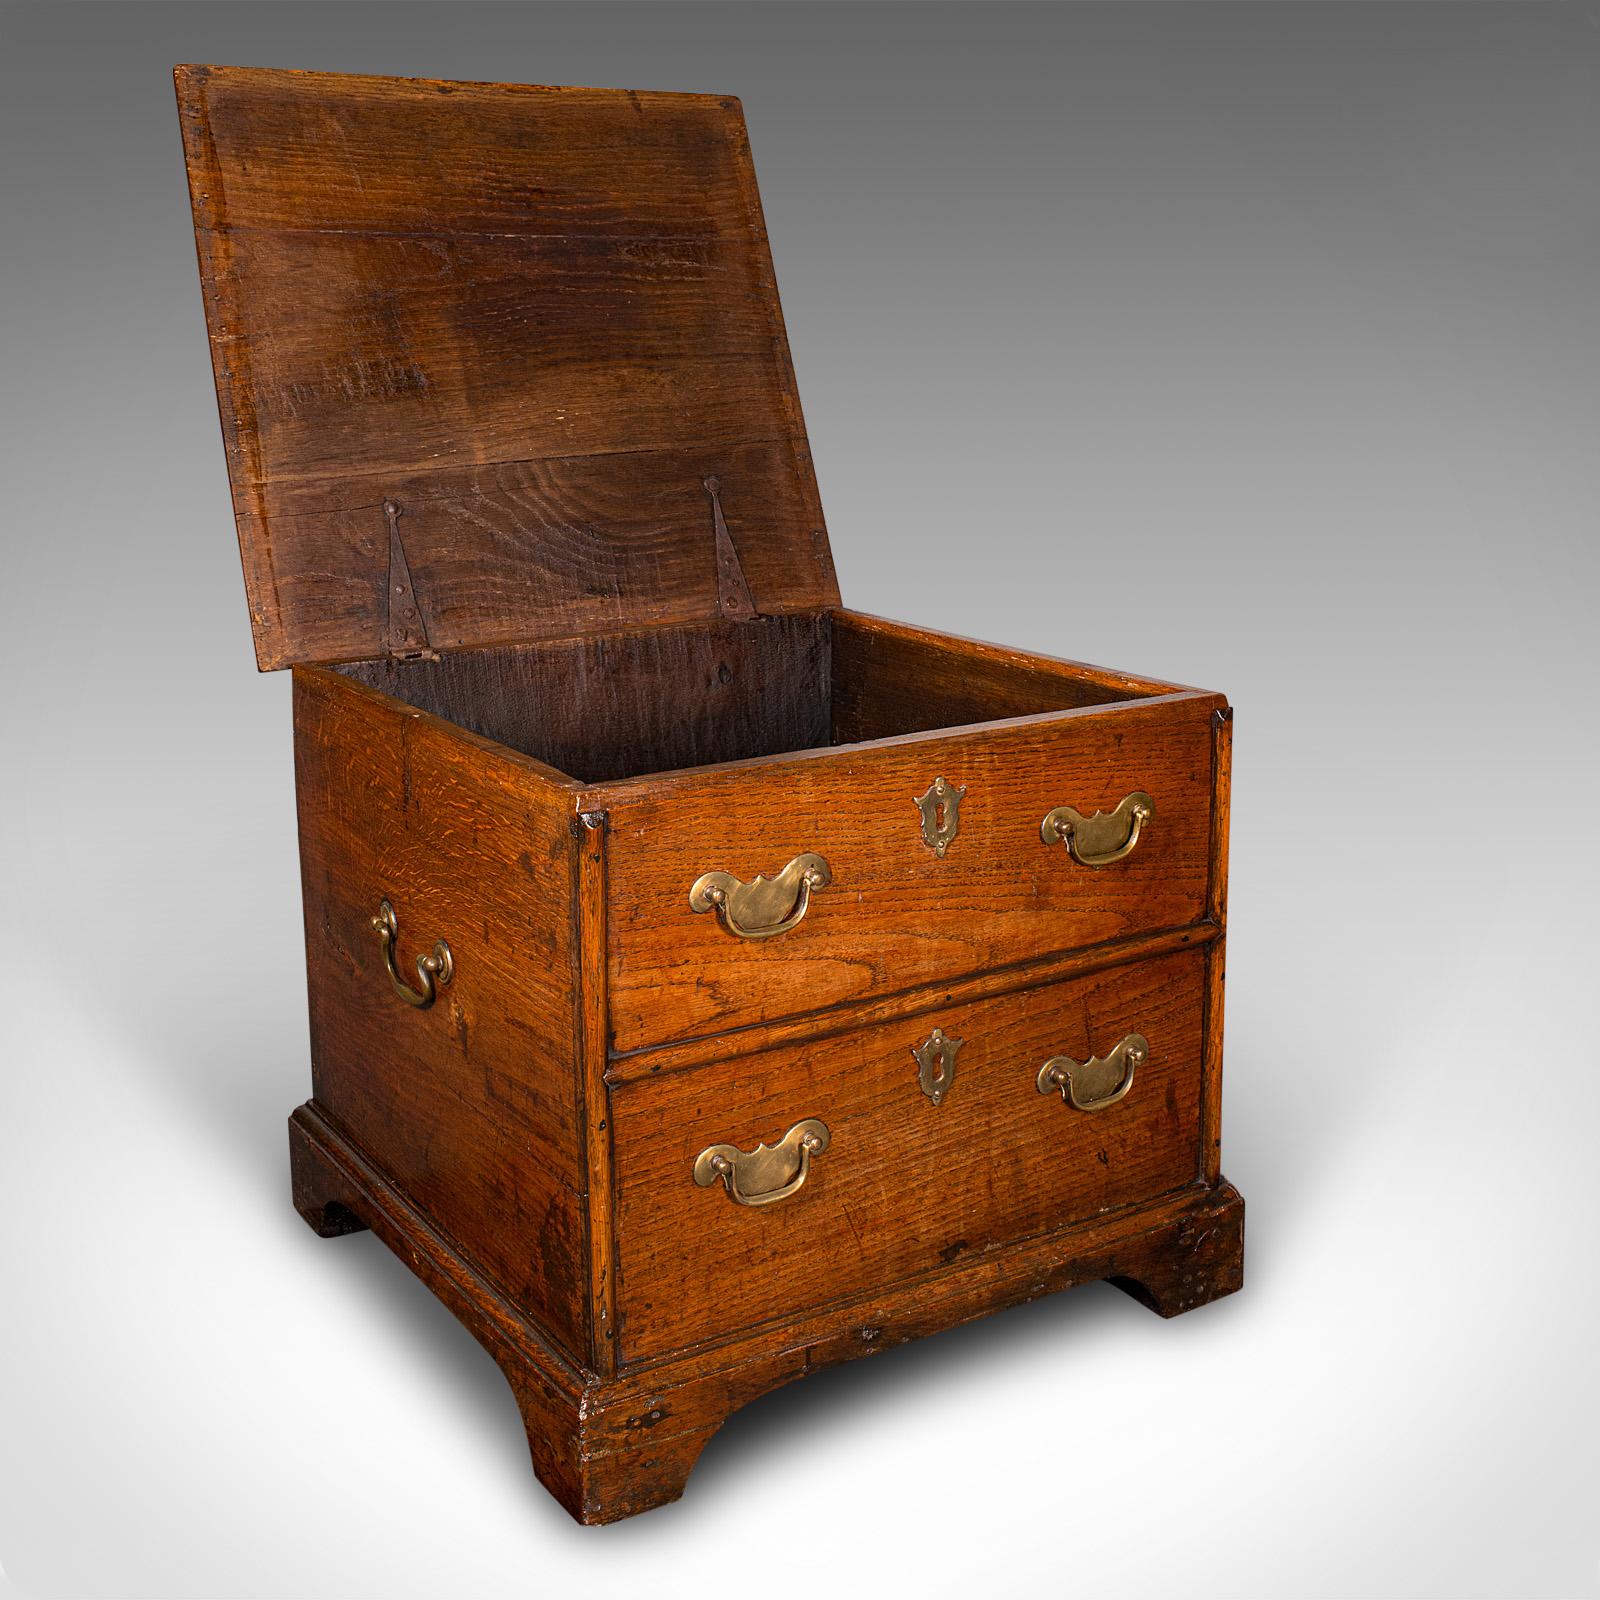 This is an antique storage chest. An English, oak fireside bin or bedside box, dating to the Georgian period and later, circa 1780.

Usefully proportioned chest with versatile covered interior
Displays a desirable aged patina and in good order